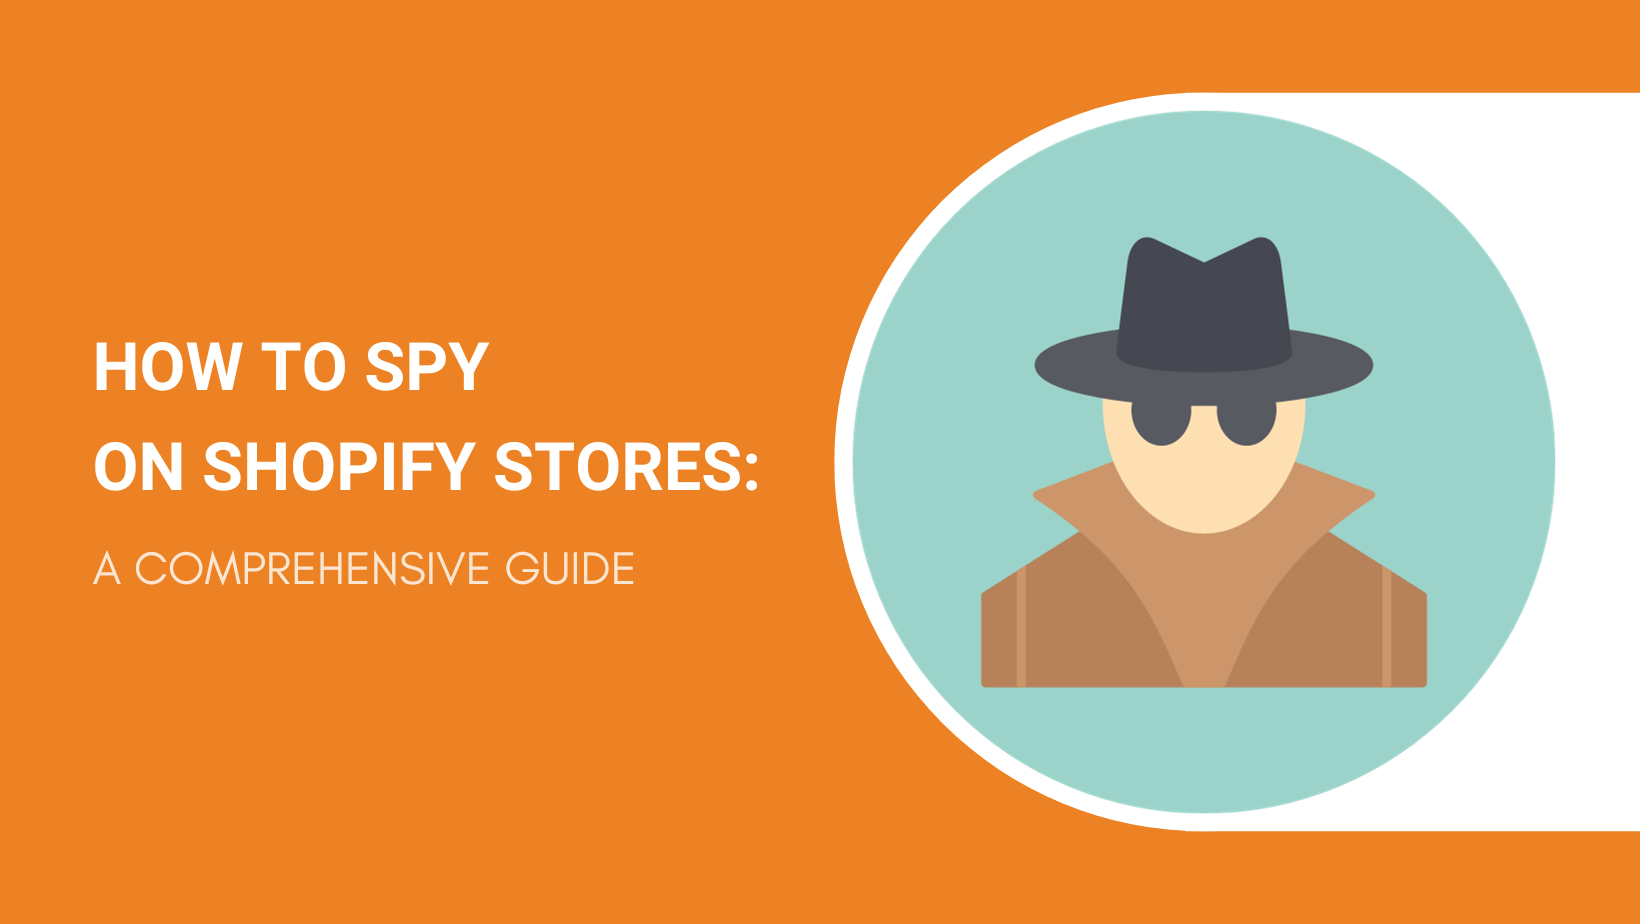 HOW TO SPY ON SHOPIFY STORES A COMPREHENSIVE GUIDE